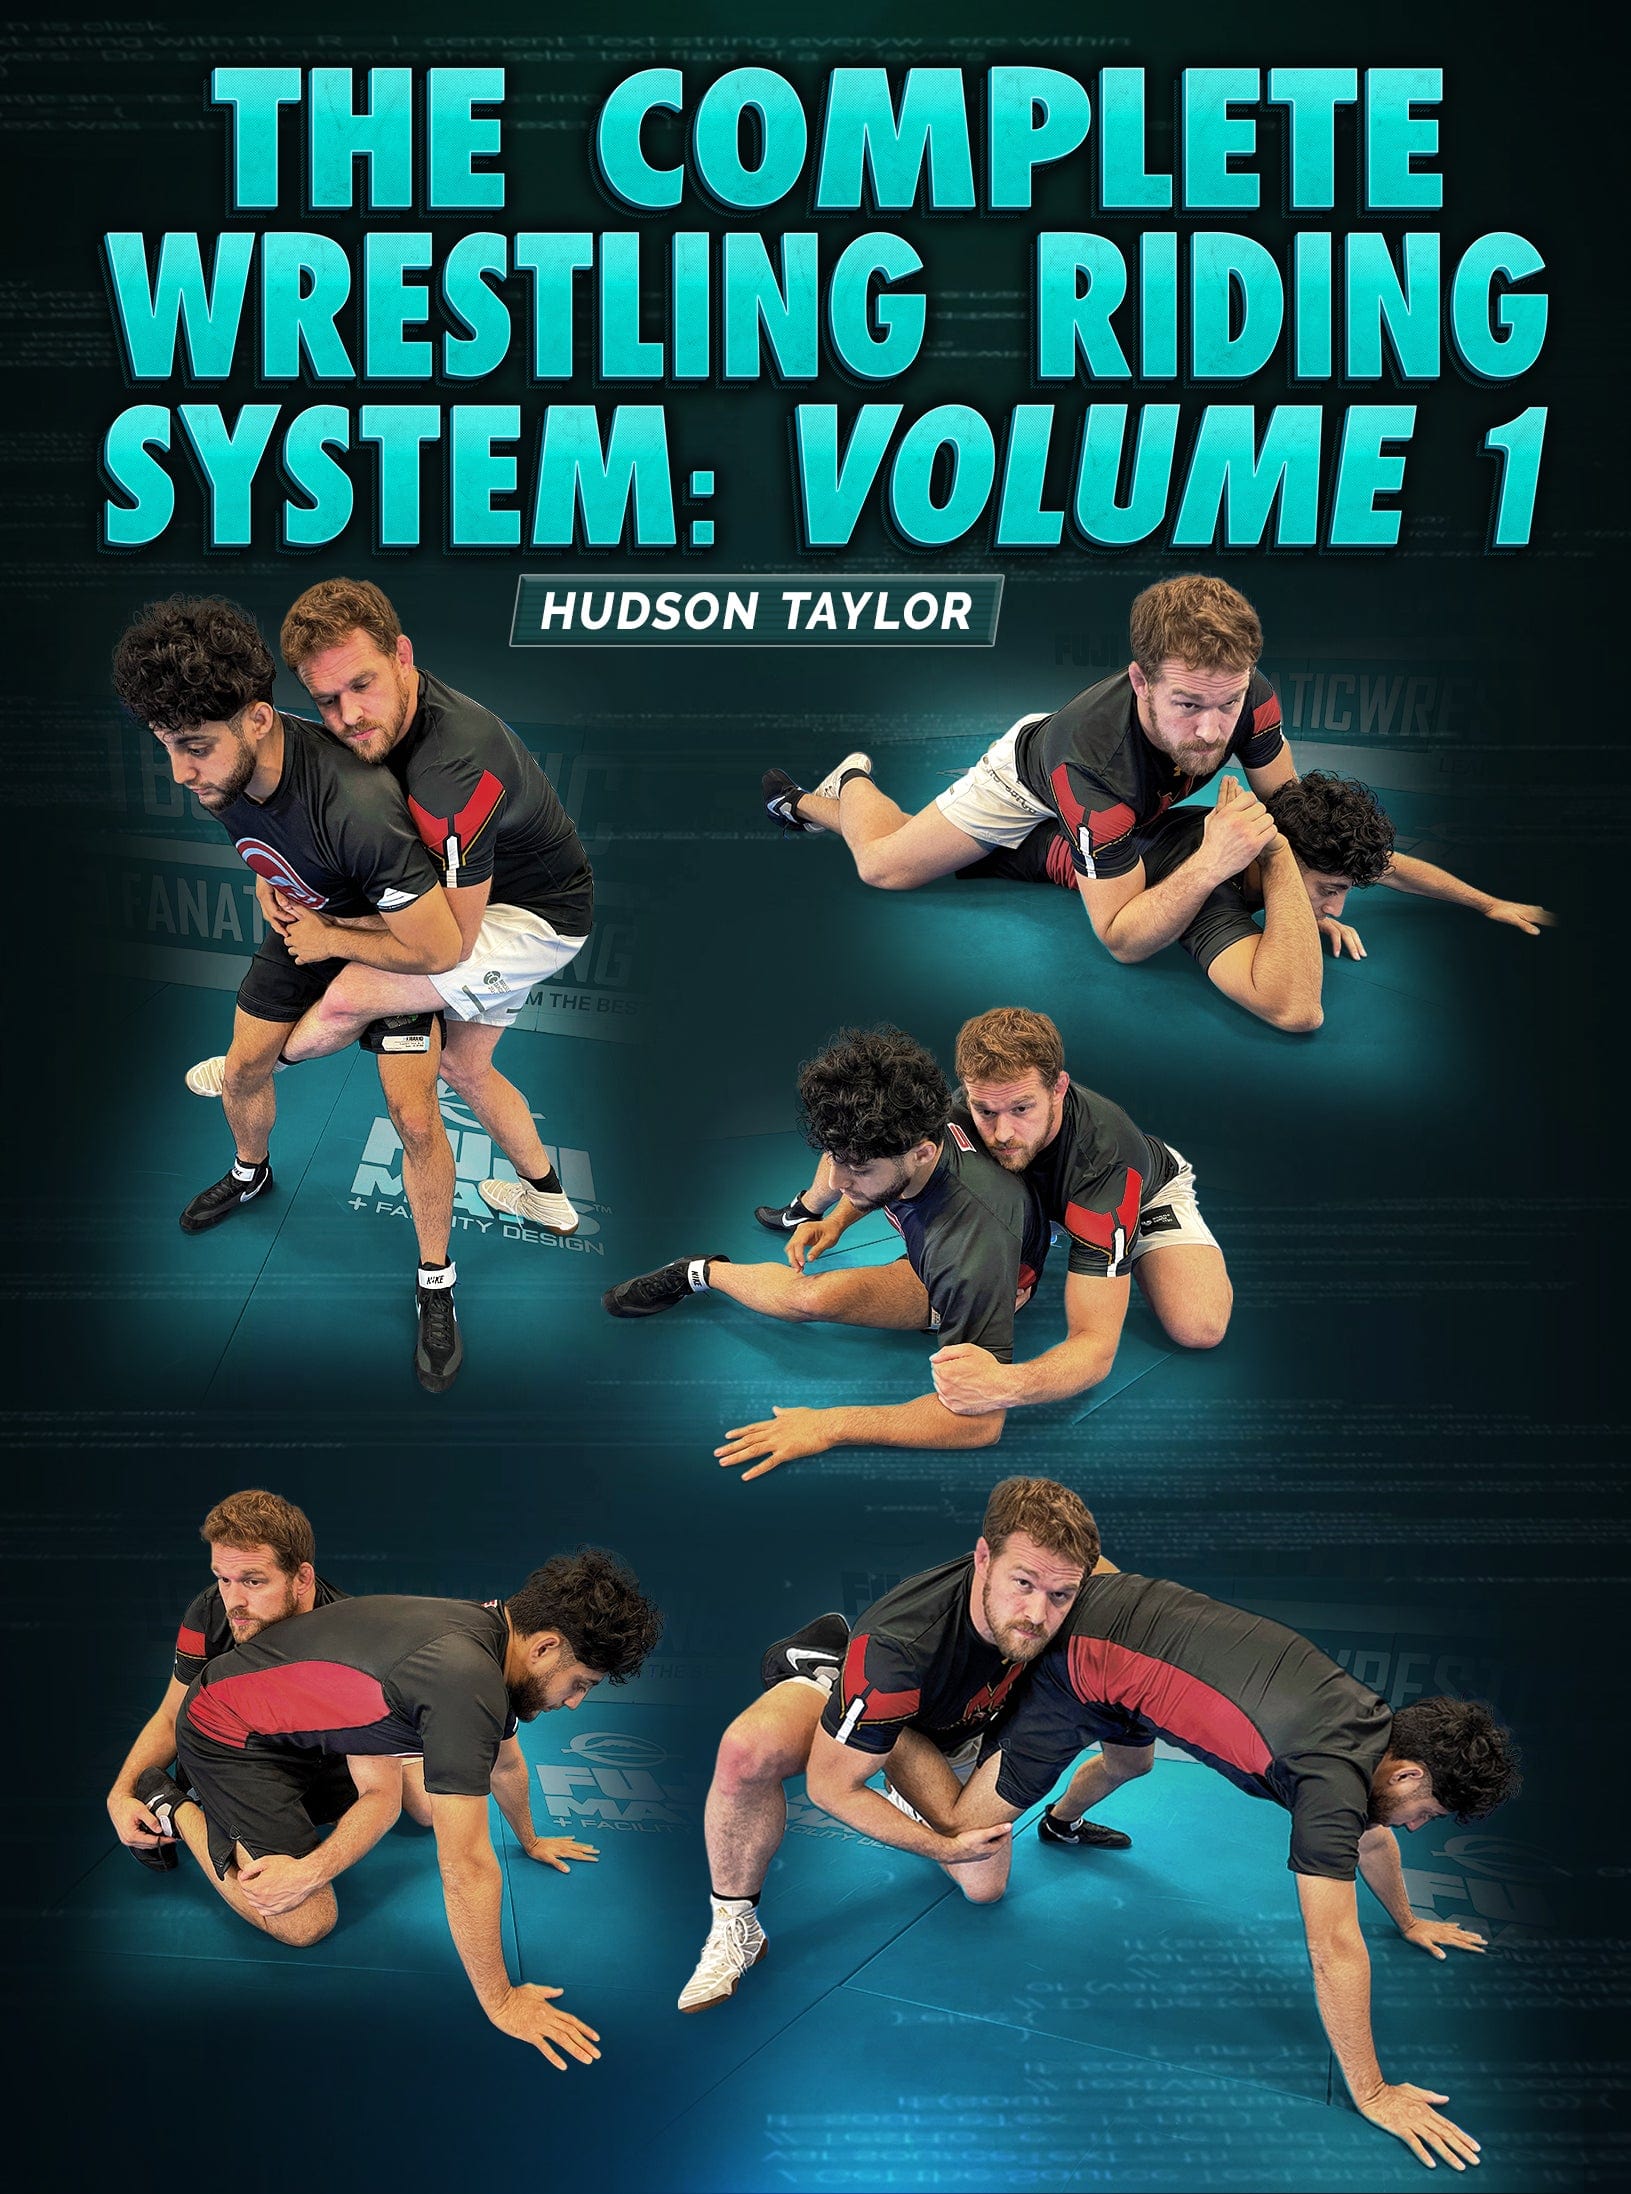 The Complete Wrestling Riding System: Volume 1 by Hudson Taylor - Fanatic Wrestling